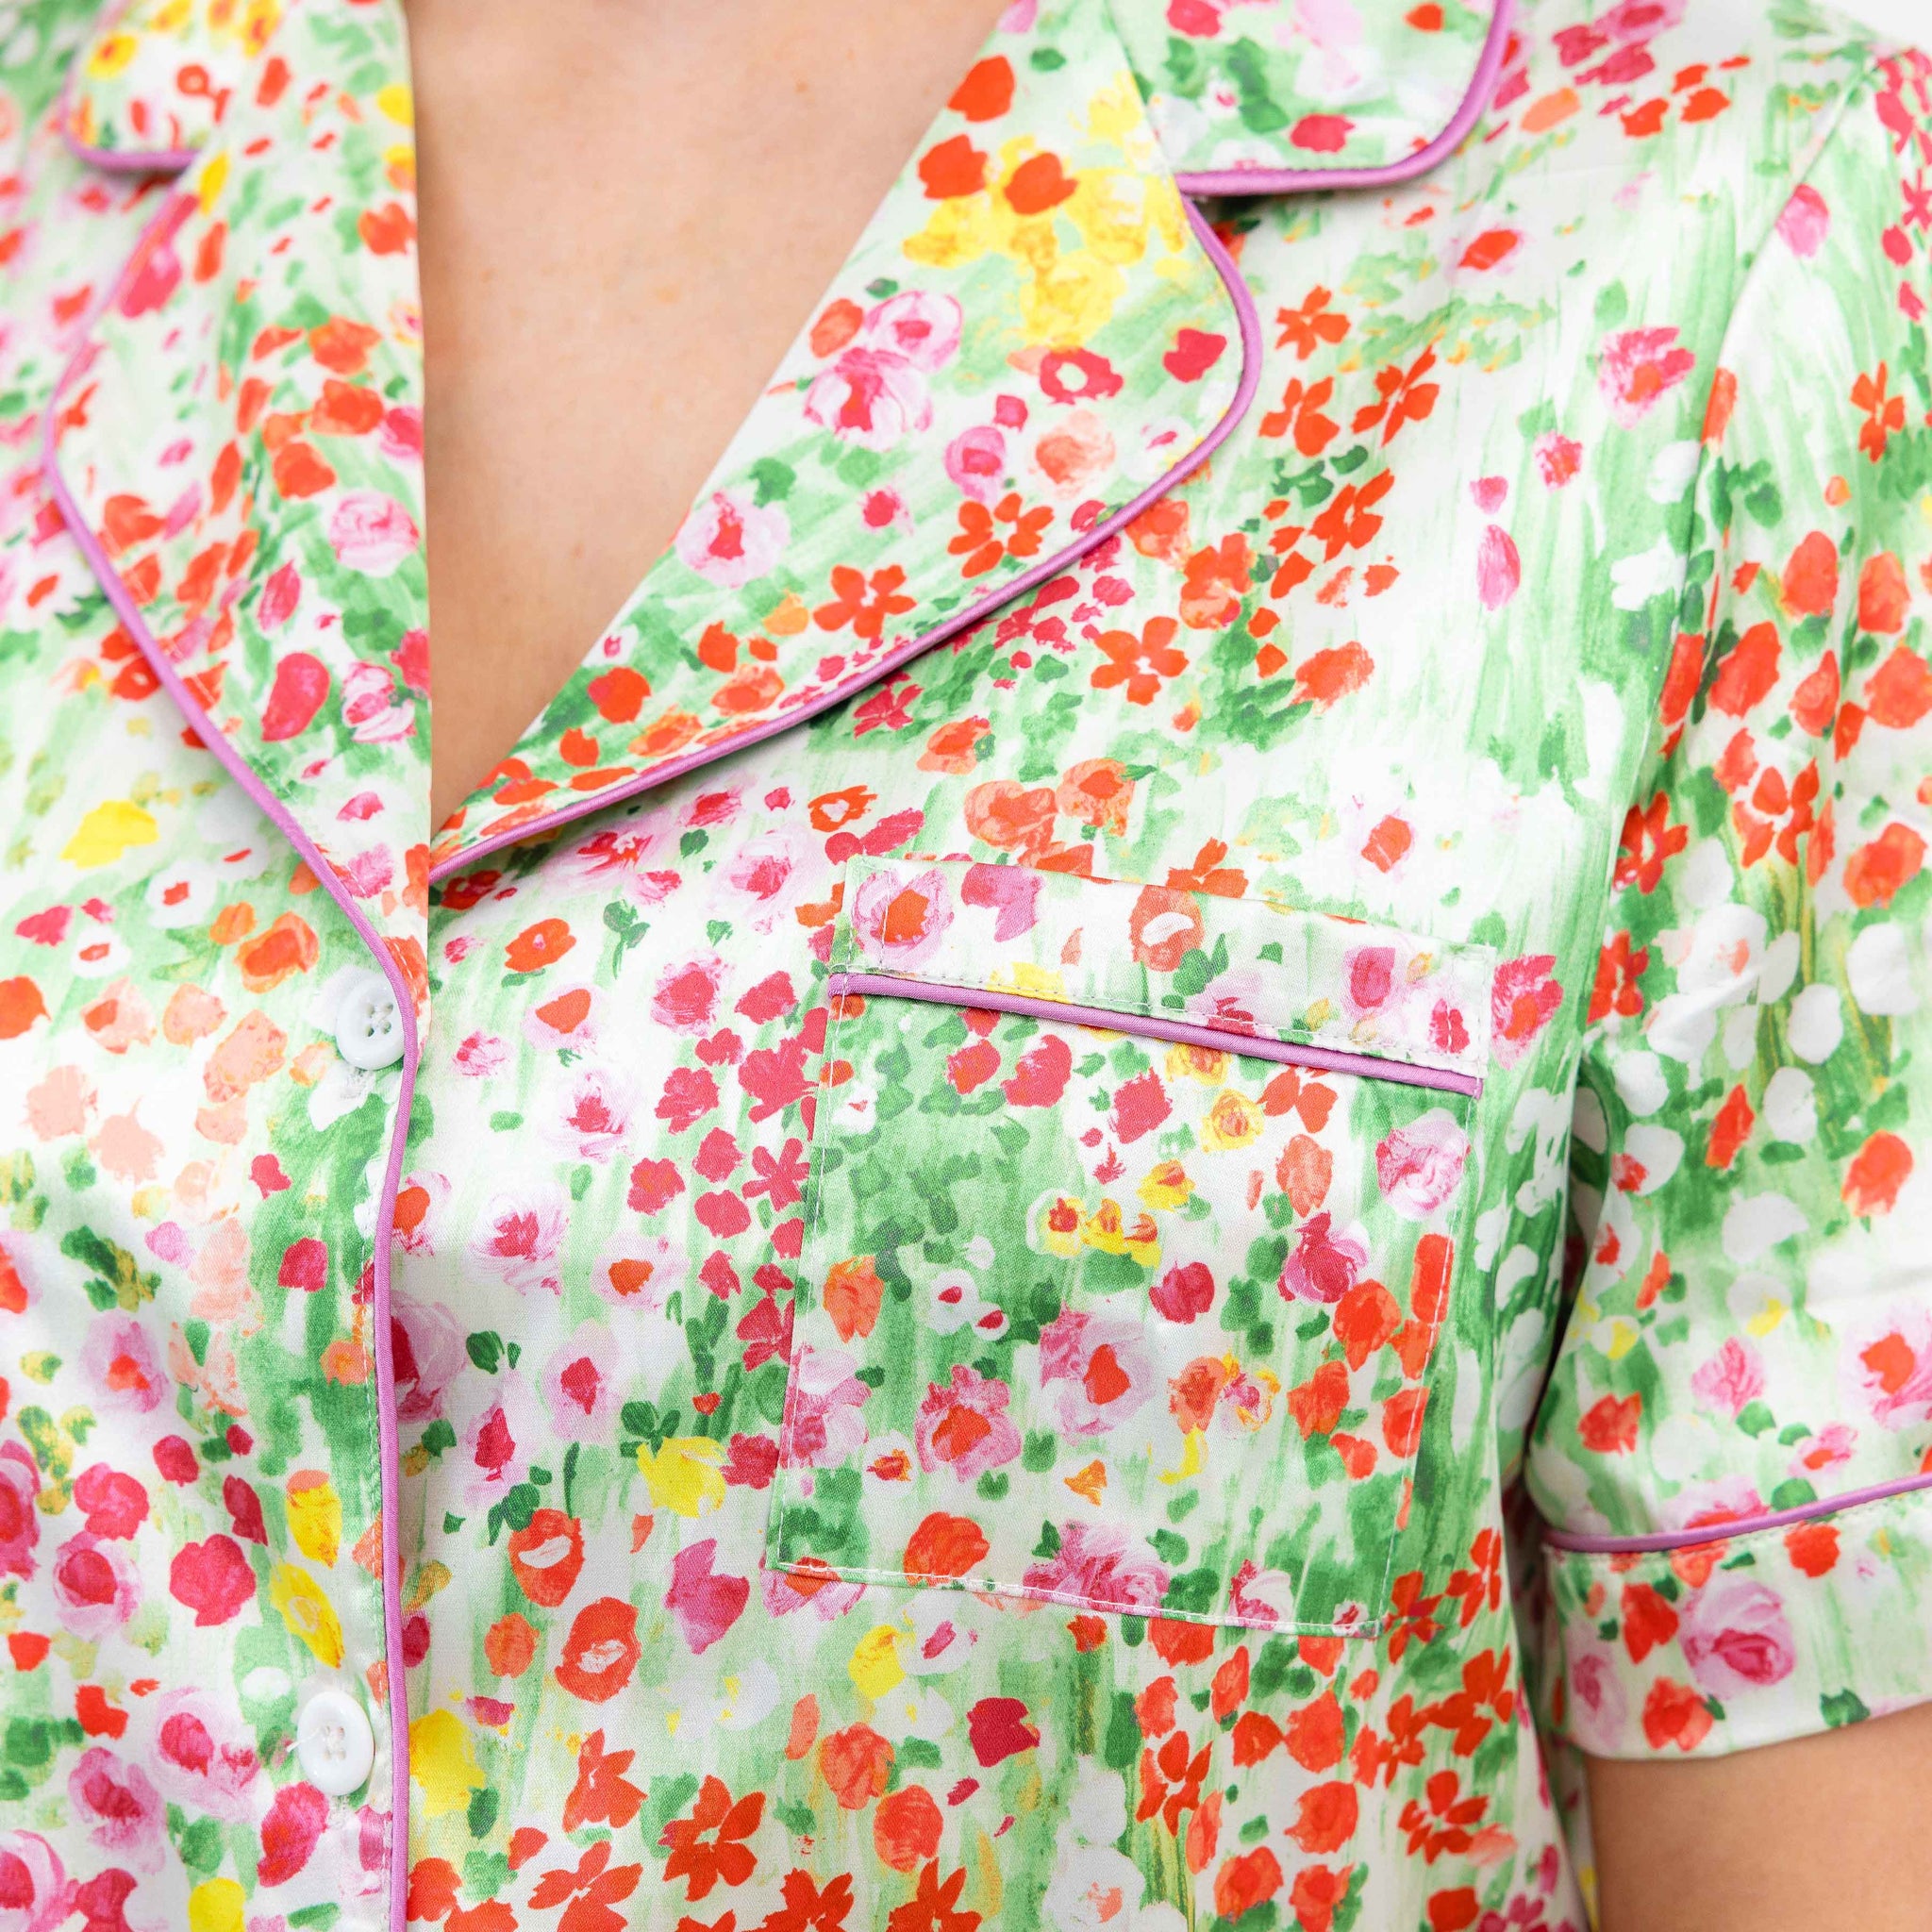 A closeup of the hand-painted digitally-printed pattern on The Happily Eva After Collection Jordan Pond Pajamas